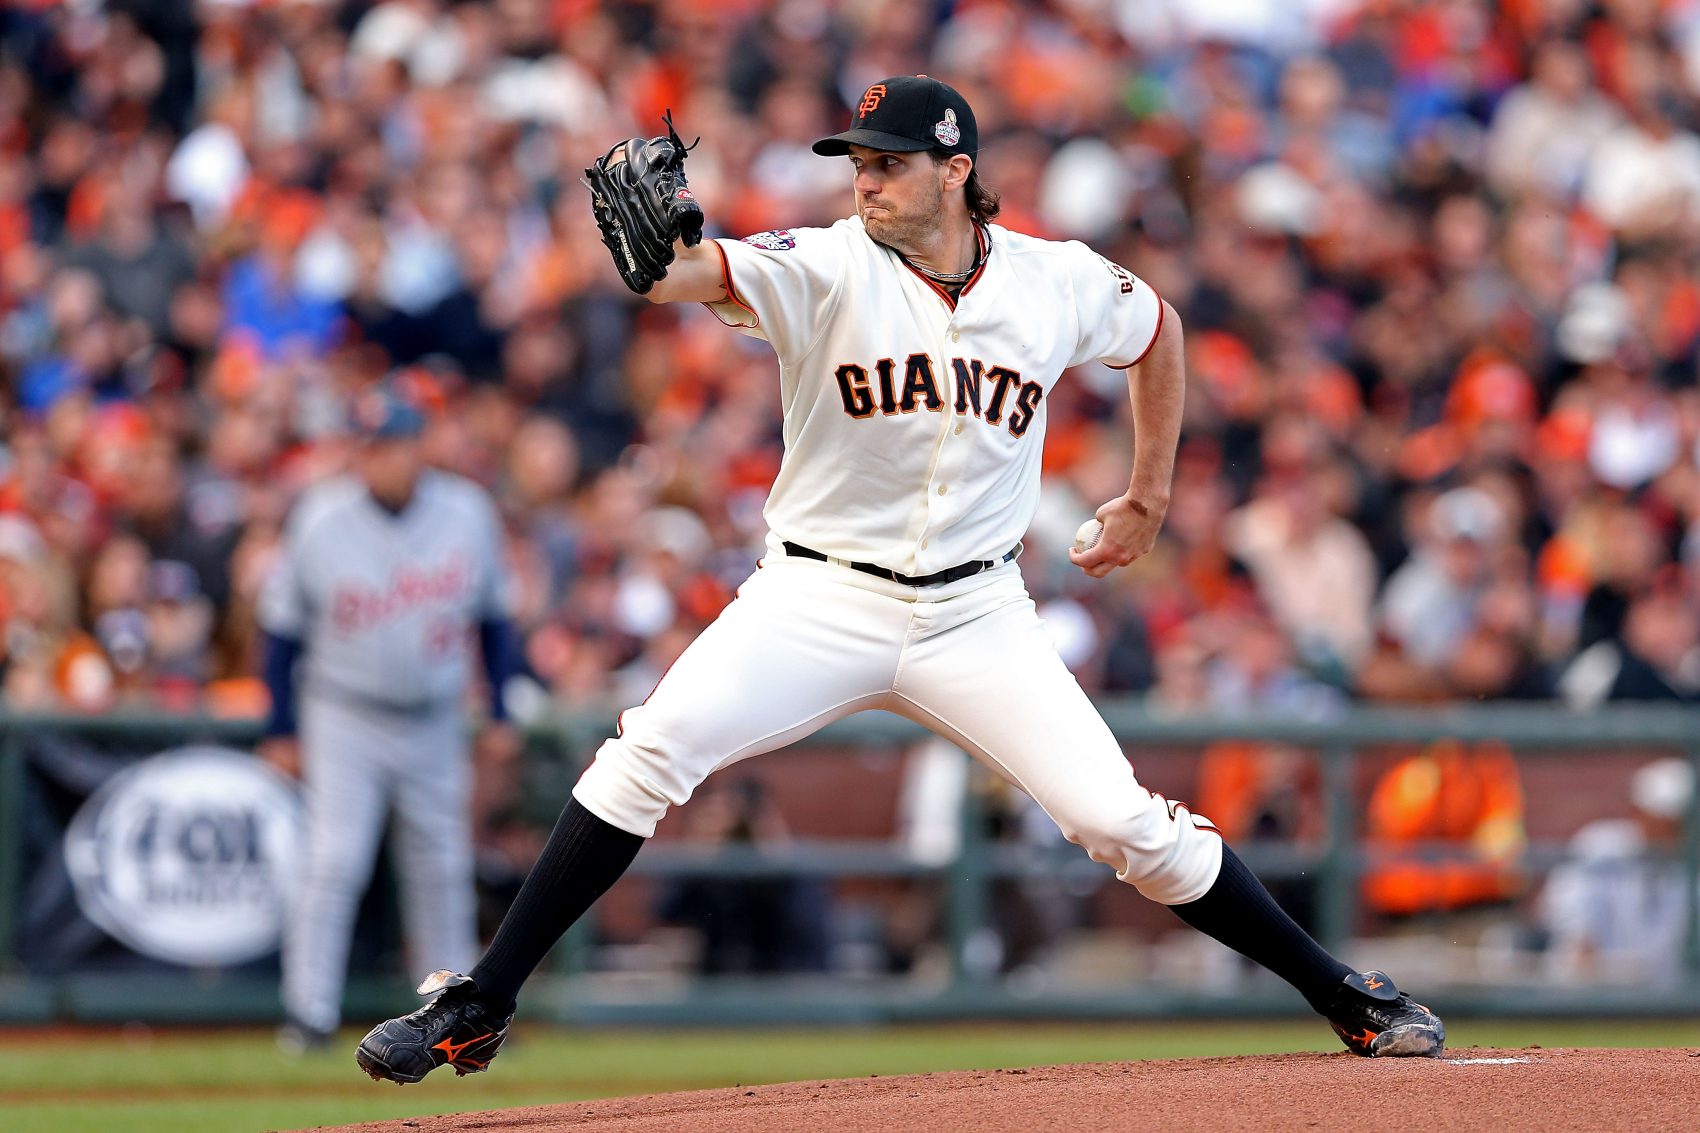 WATCH: Former Cy Young pitcher Barry Zito rocks out with Savannah